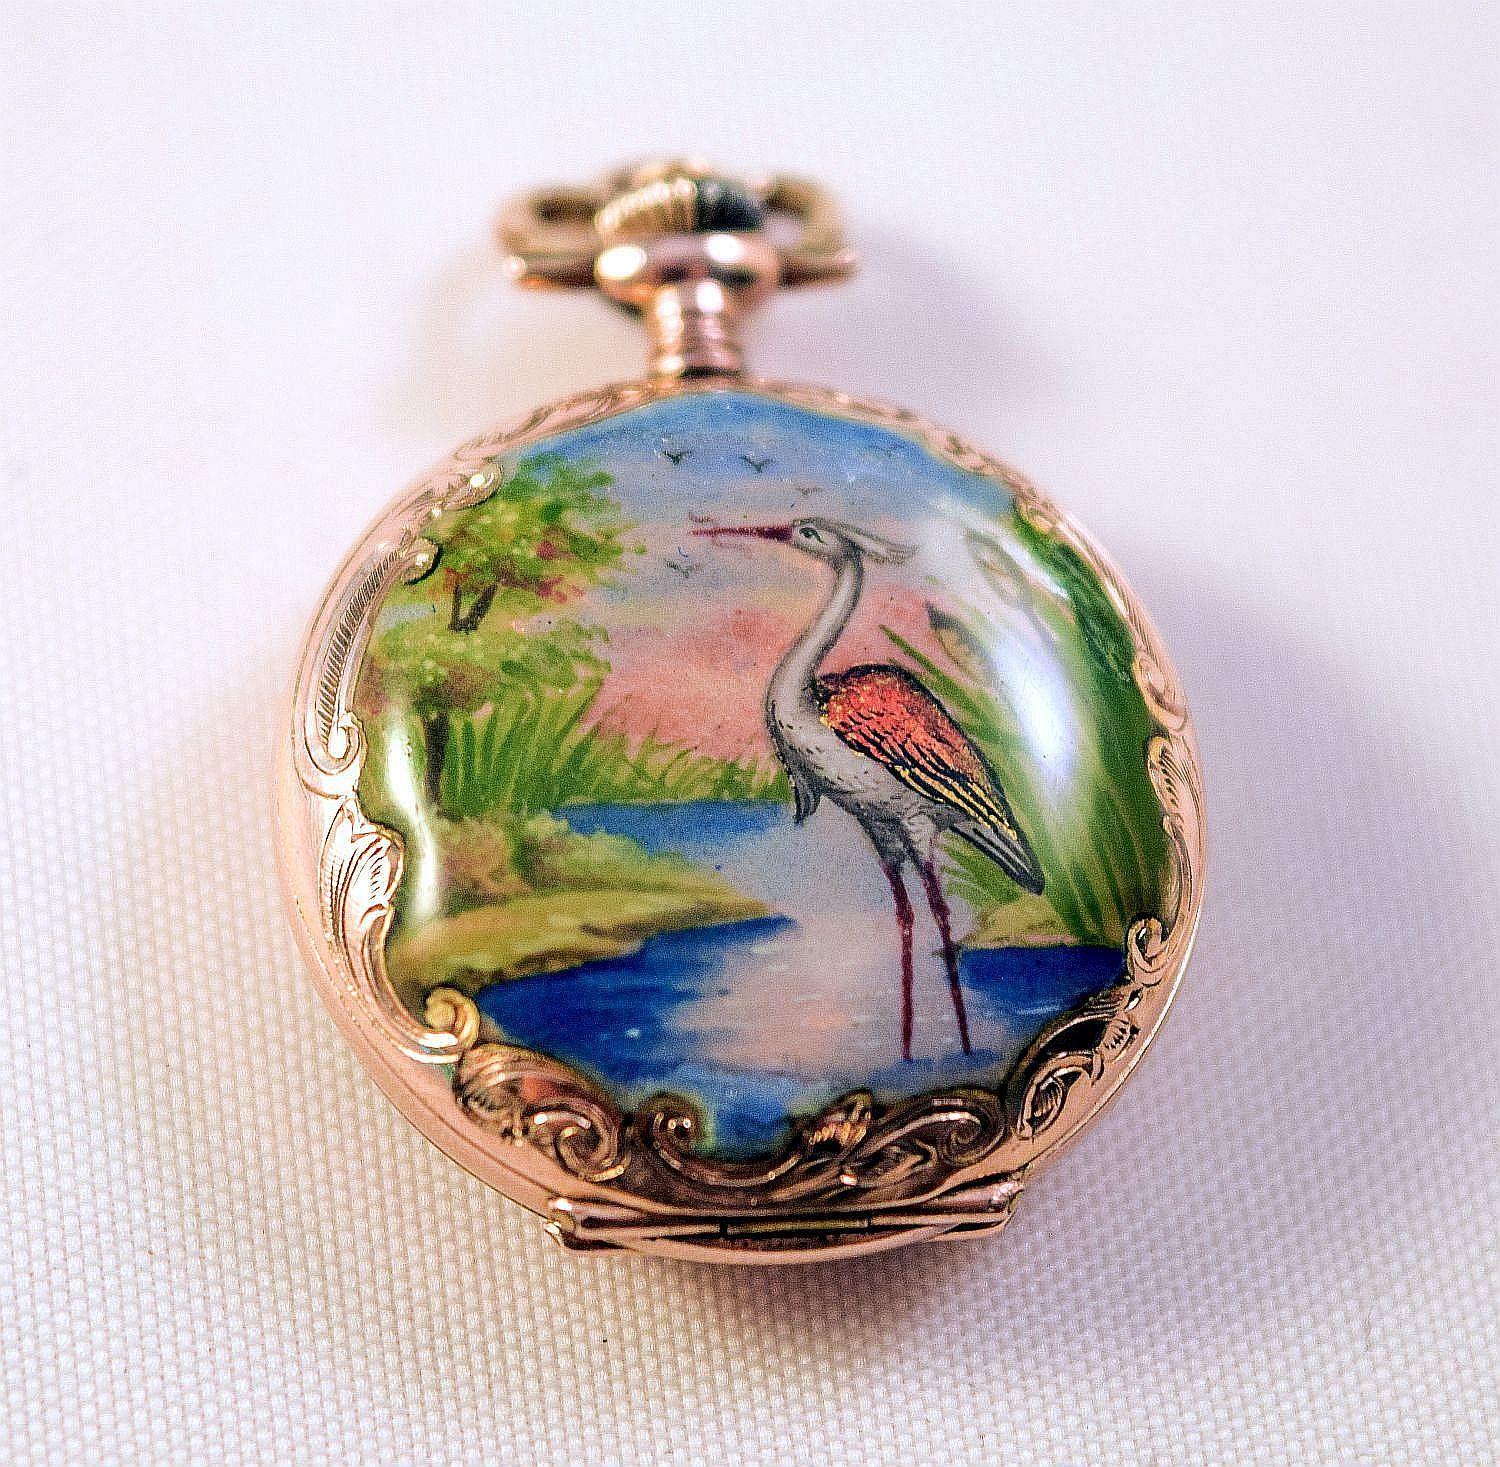 Enamel Pocket Watch Hunter case tropical landscapes and Heron amazing condition 4